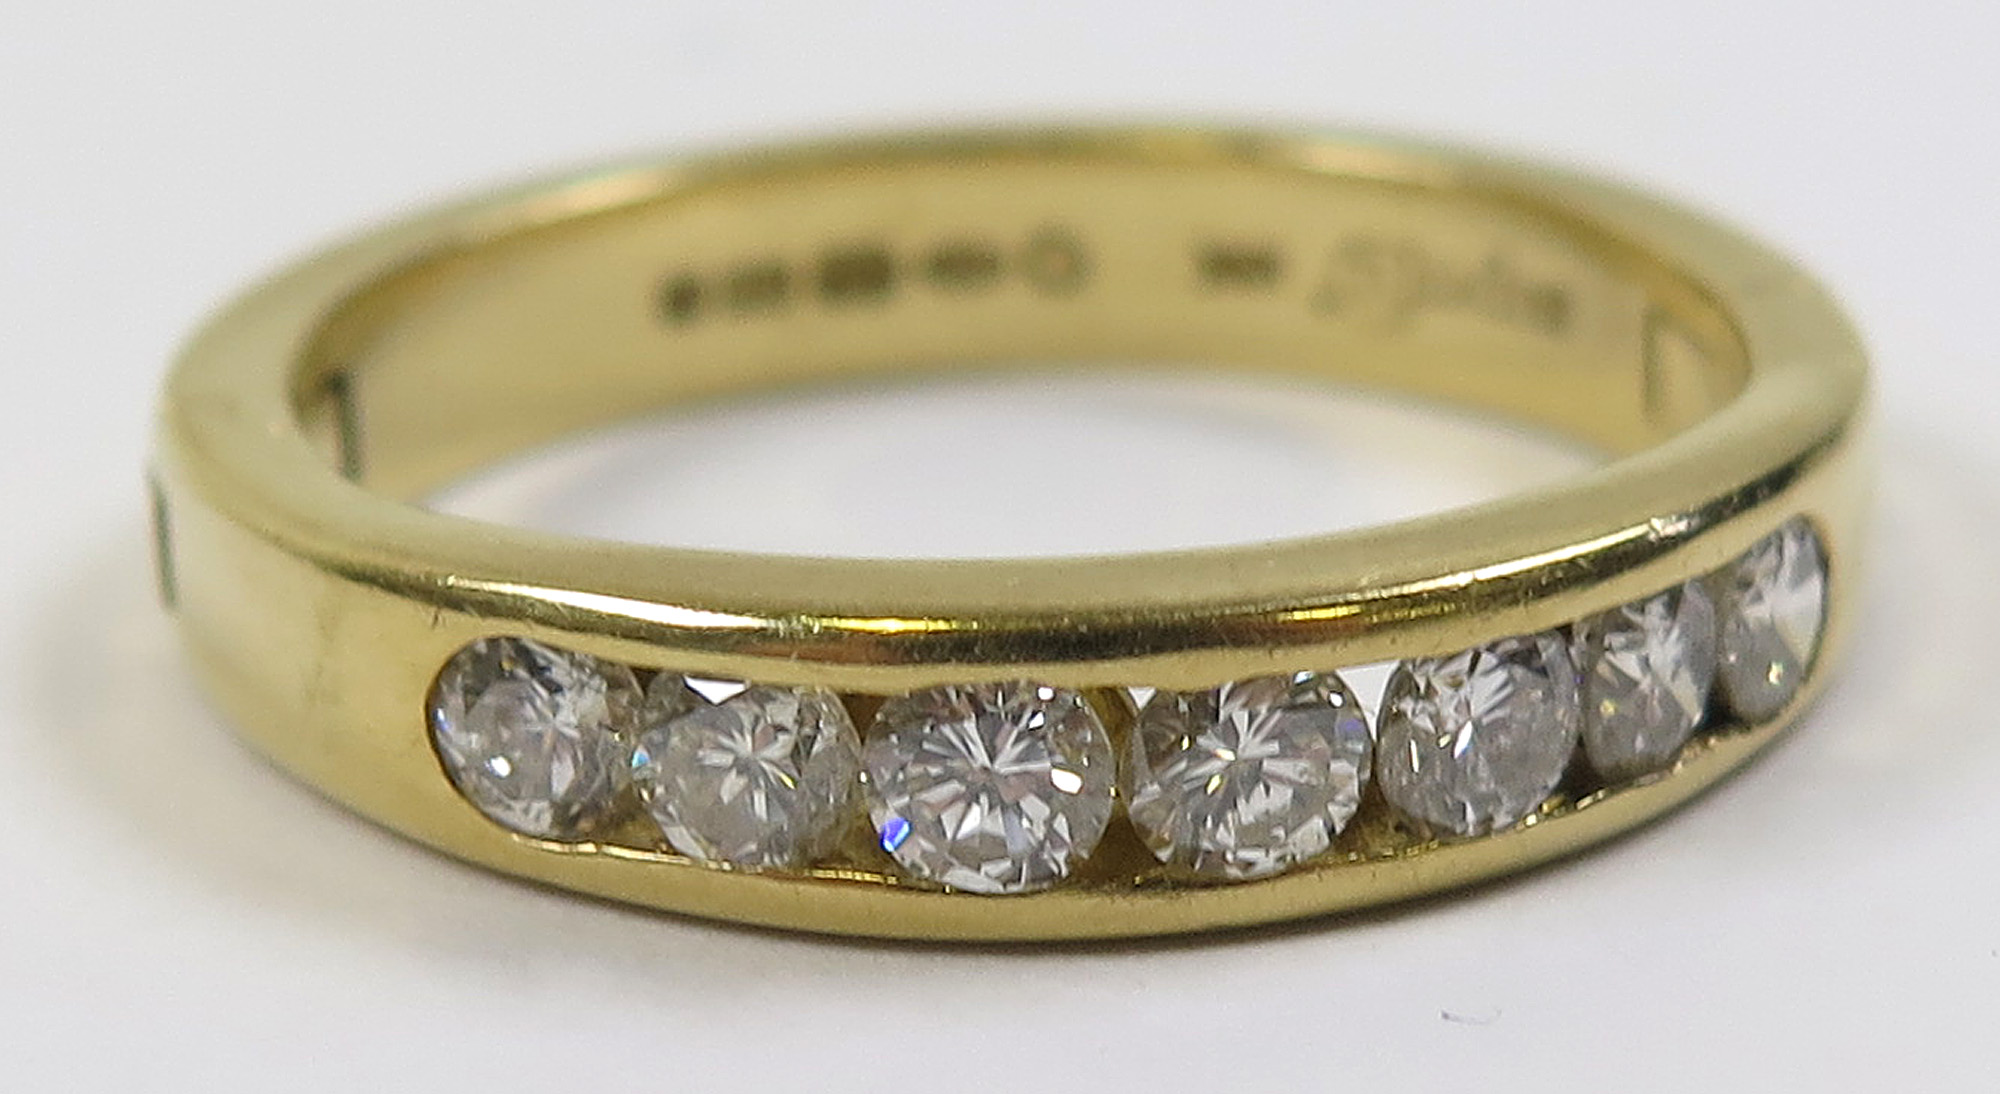 18ct 7 stone Channel set Diamond Ring approx. 0.70ct weight size U weight 7.8 grams